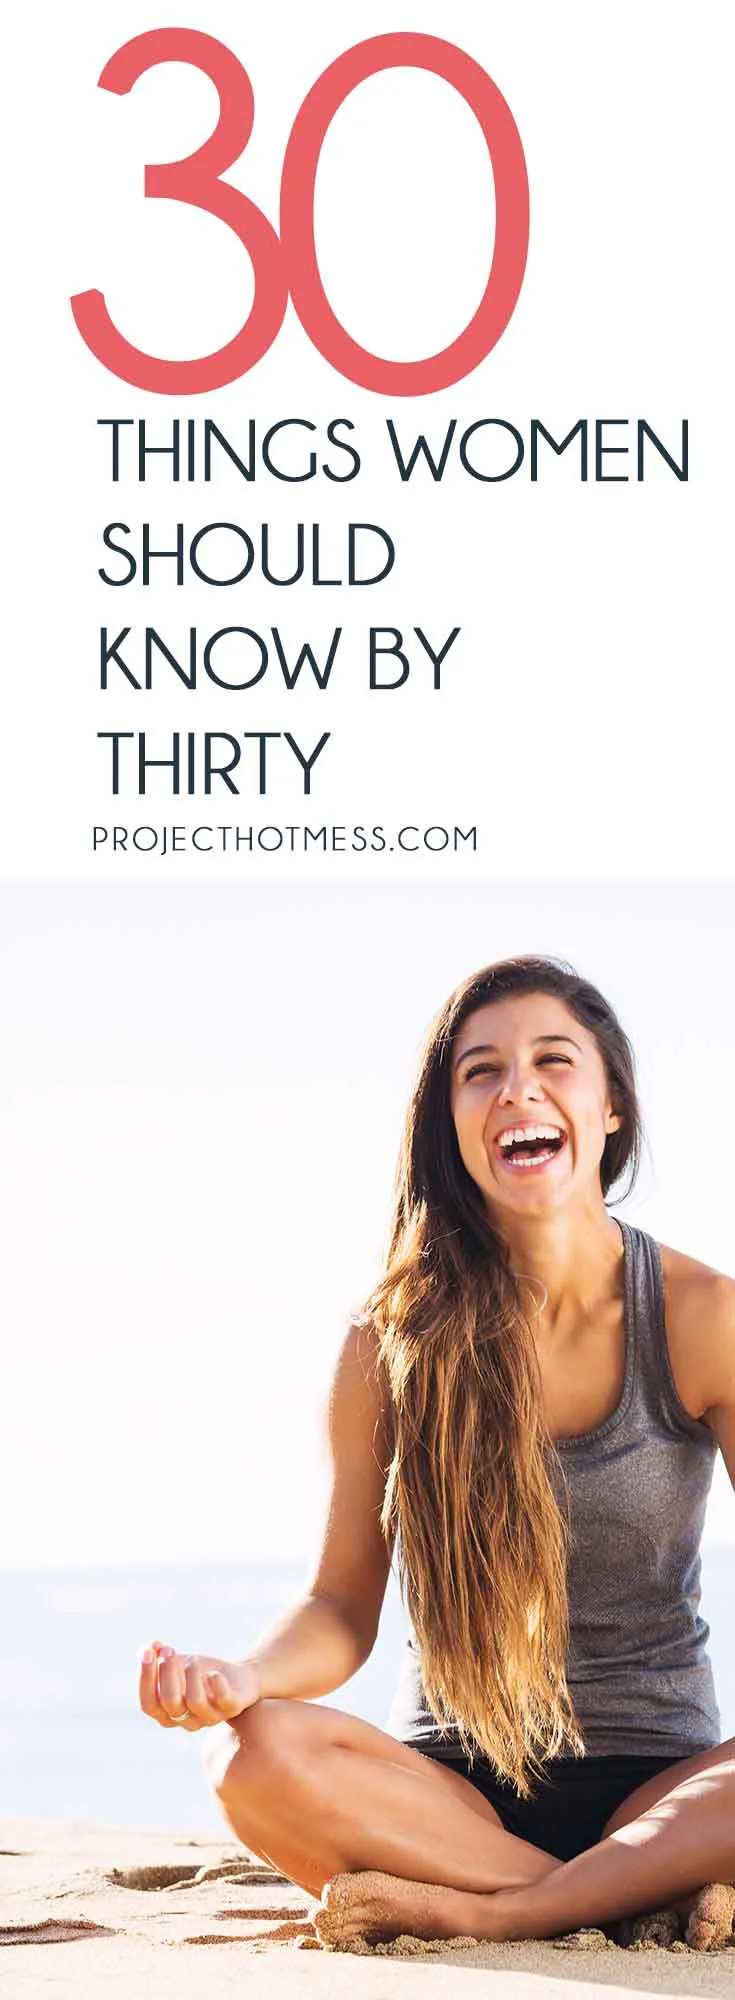 Think by the time you turn 30 you need to have this whole 'adult' thing down pat? You definitely don't, but there are certain things women should know by the time 30 comes around (or even sooner).